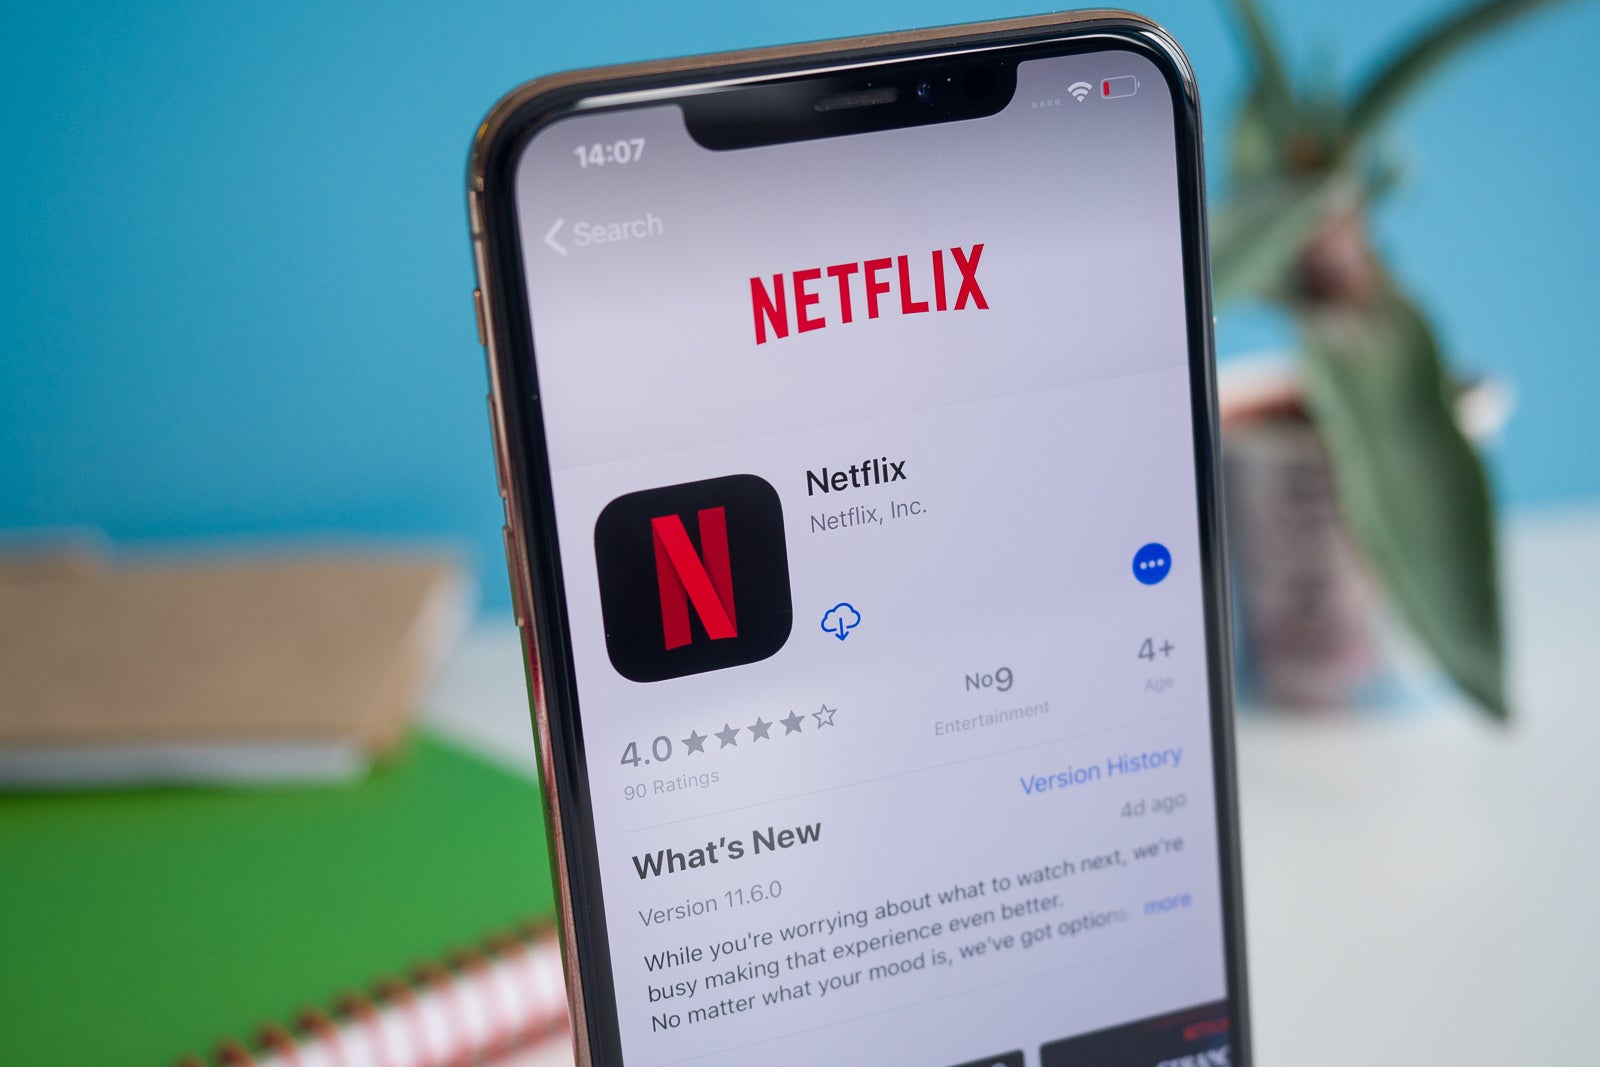 It&#039;s all fun and games. Netflix isn&#039;t only about movies and TV-series anymore - Netflix Games is now available for iOS and iPadOS